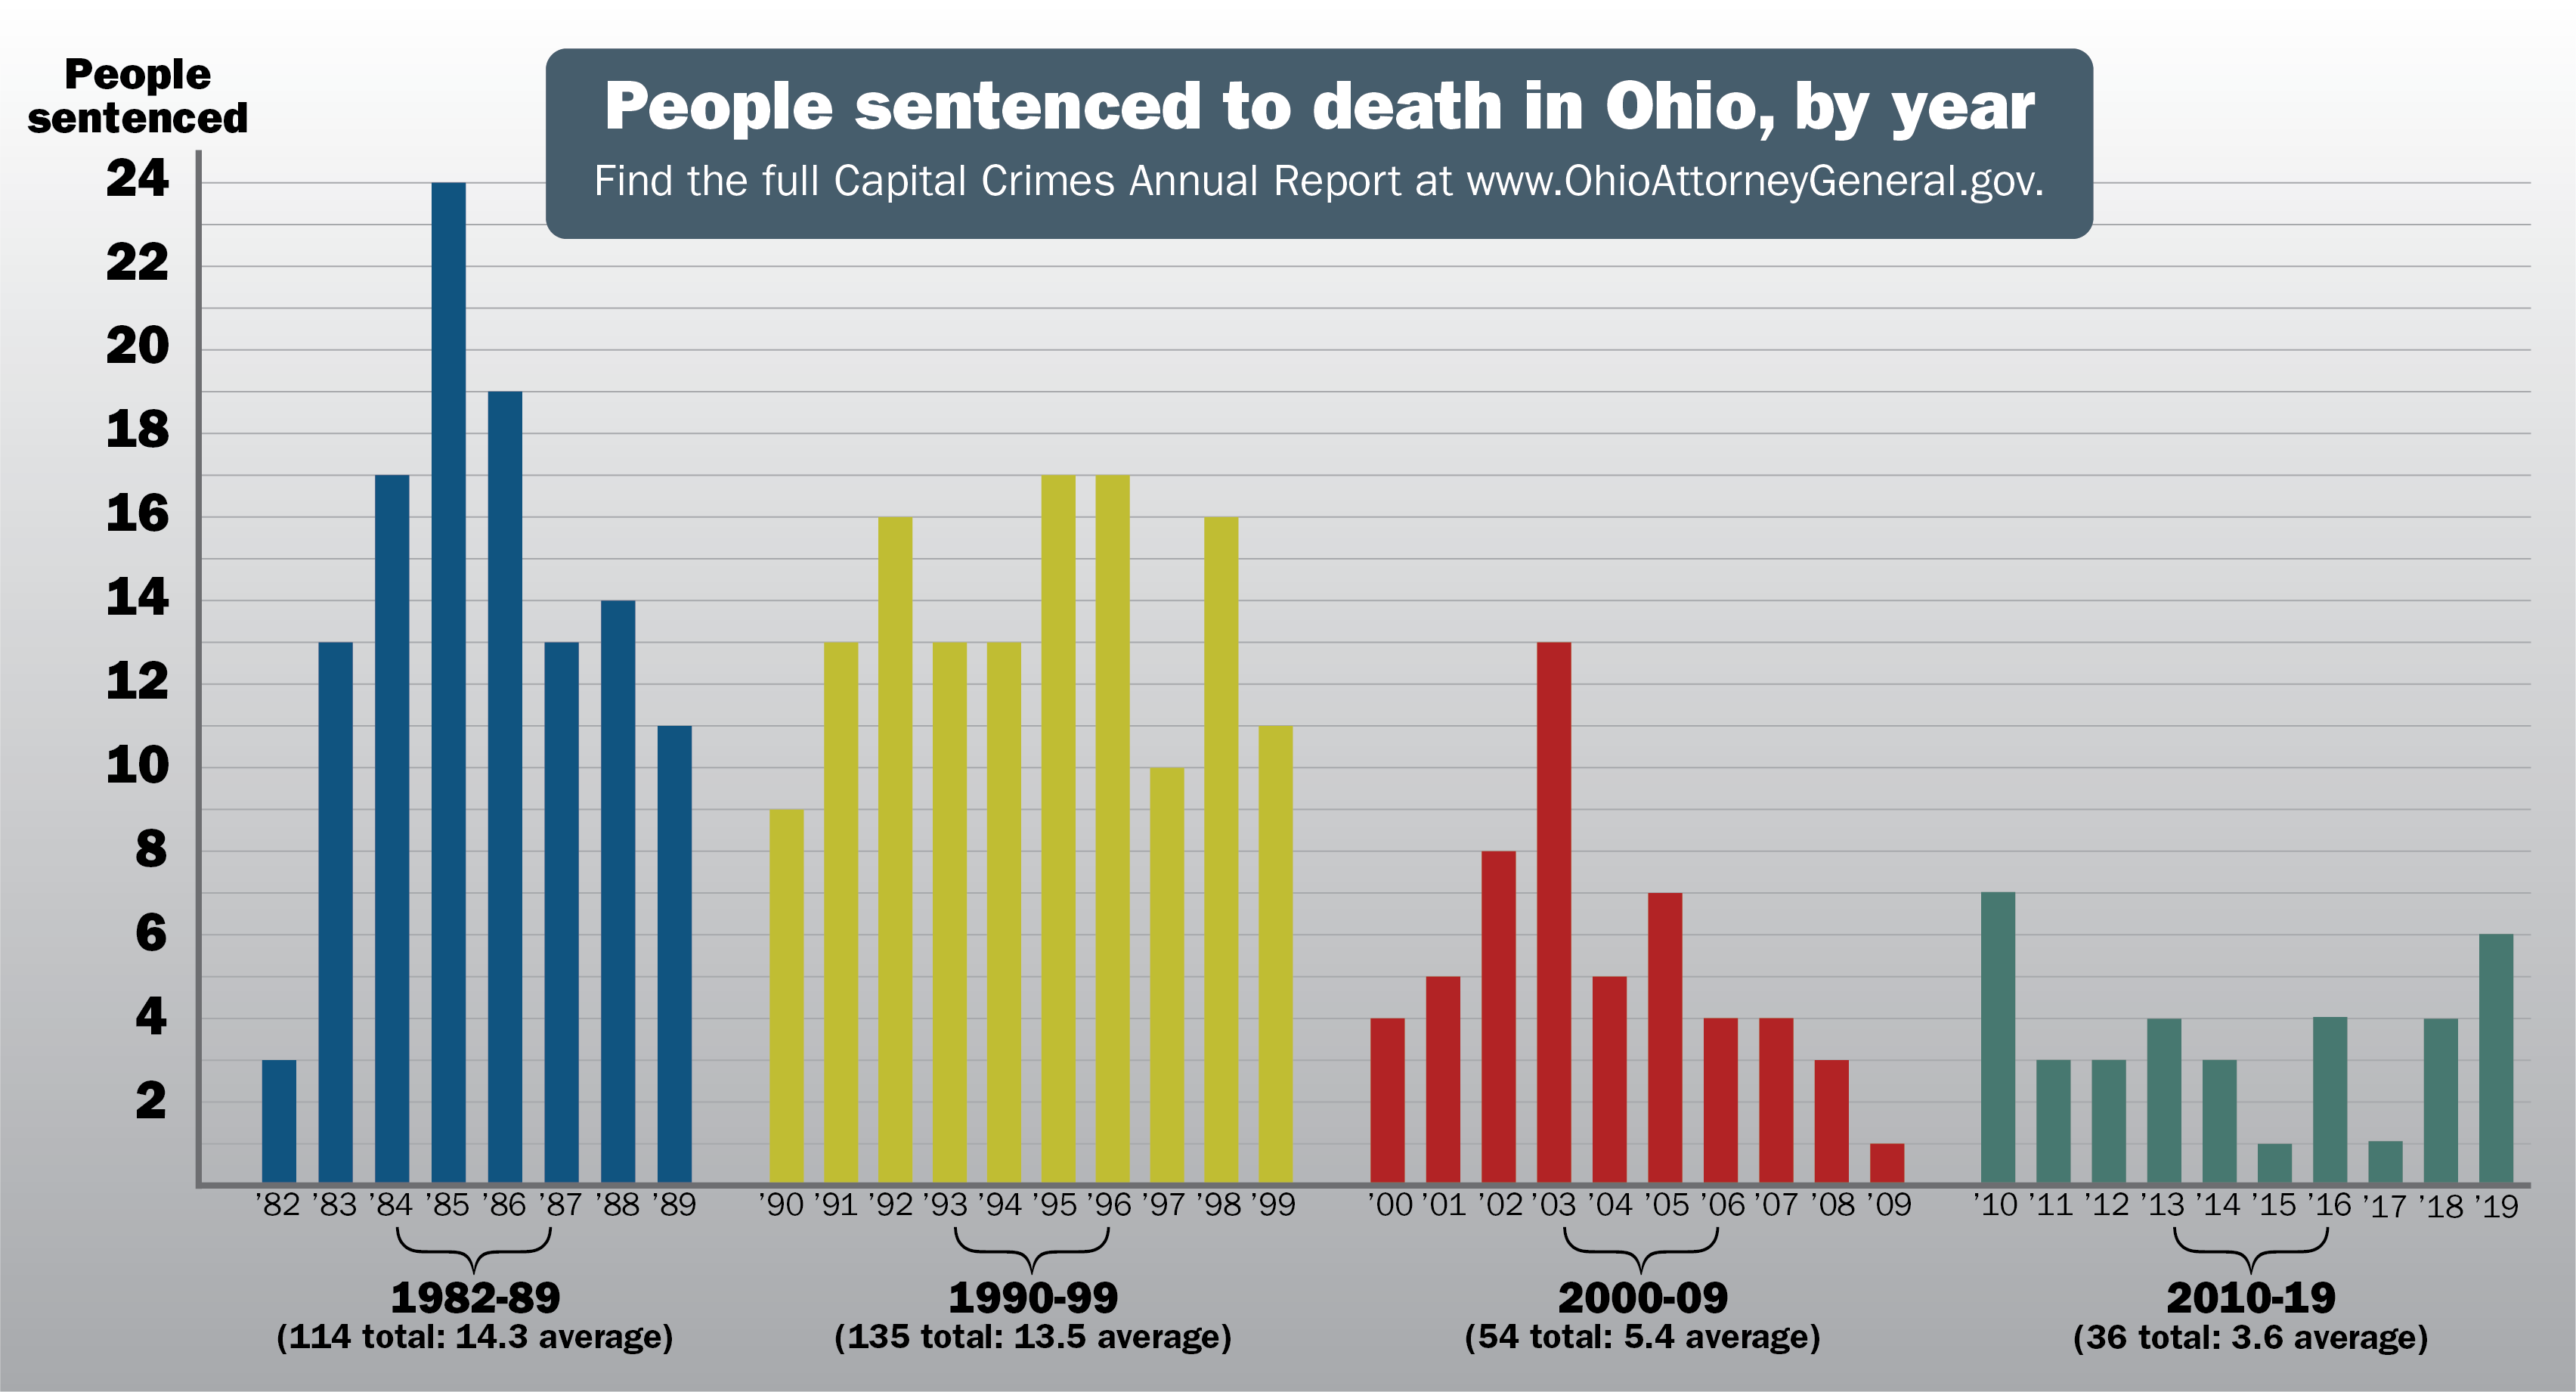 This graphic shows people sentenced to death by year in Ohio, with a clear trend of significantly highers numbers in the 1980s